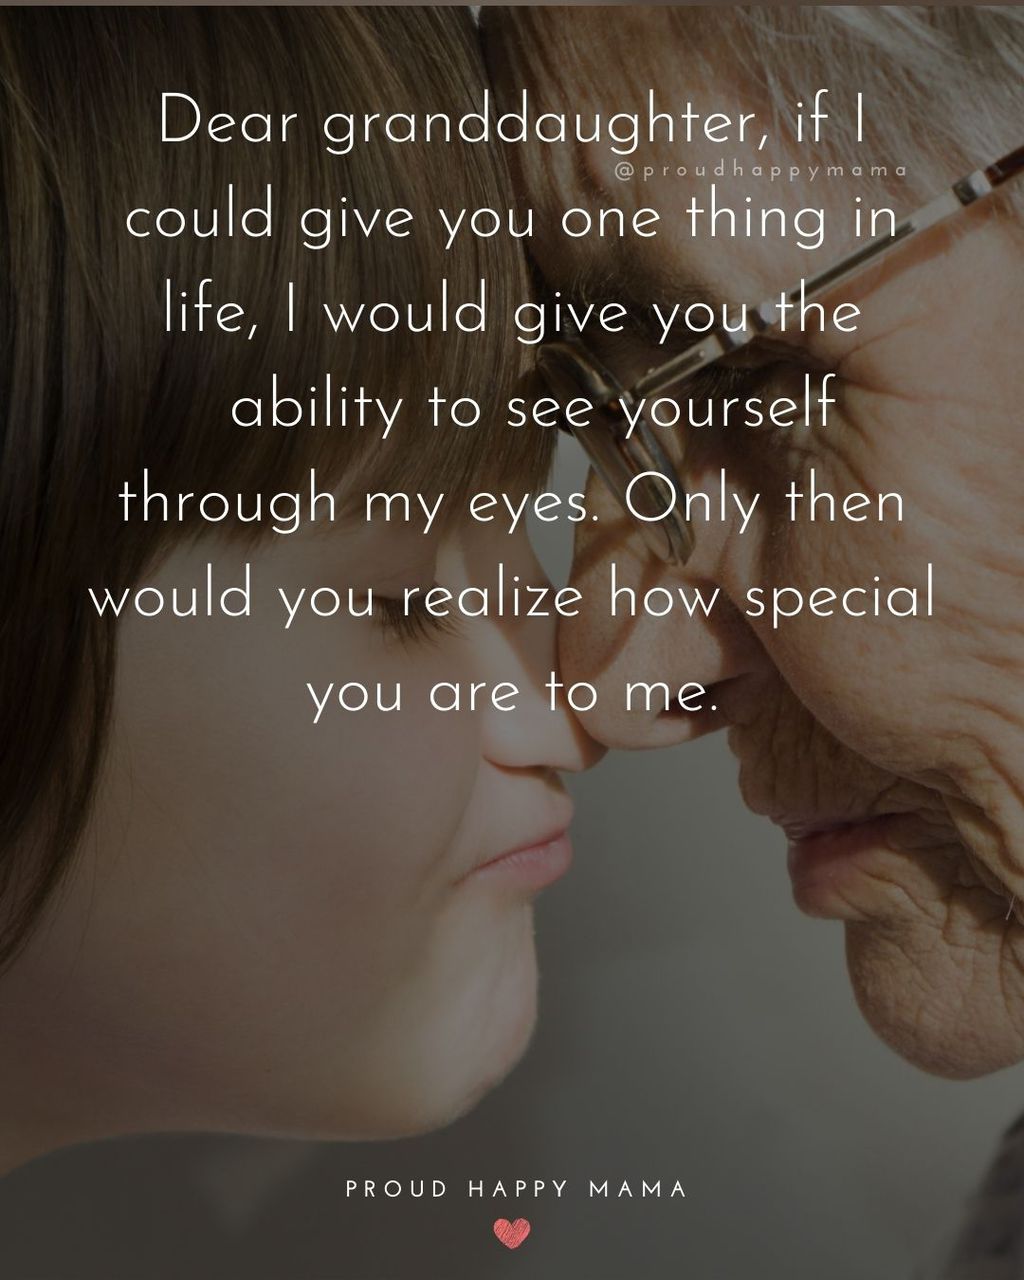 Granddaughter and grand mother with eyes closed and noses touching with text overlay, ‘Dear granddaughter, if I could give you one thing in life, I would give you the ability to see yourself through my eyes. Only then would you realize how special you are to me.’